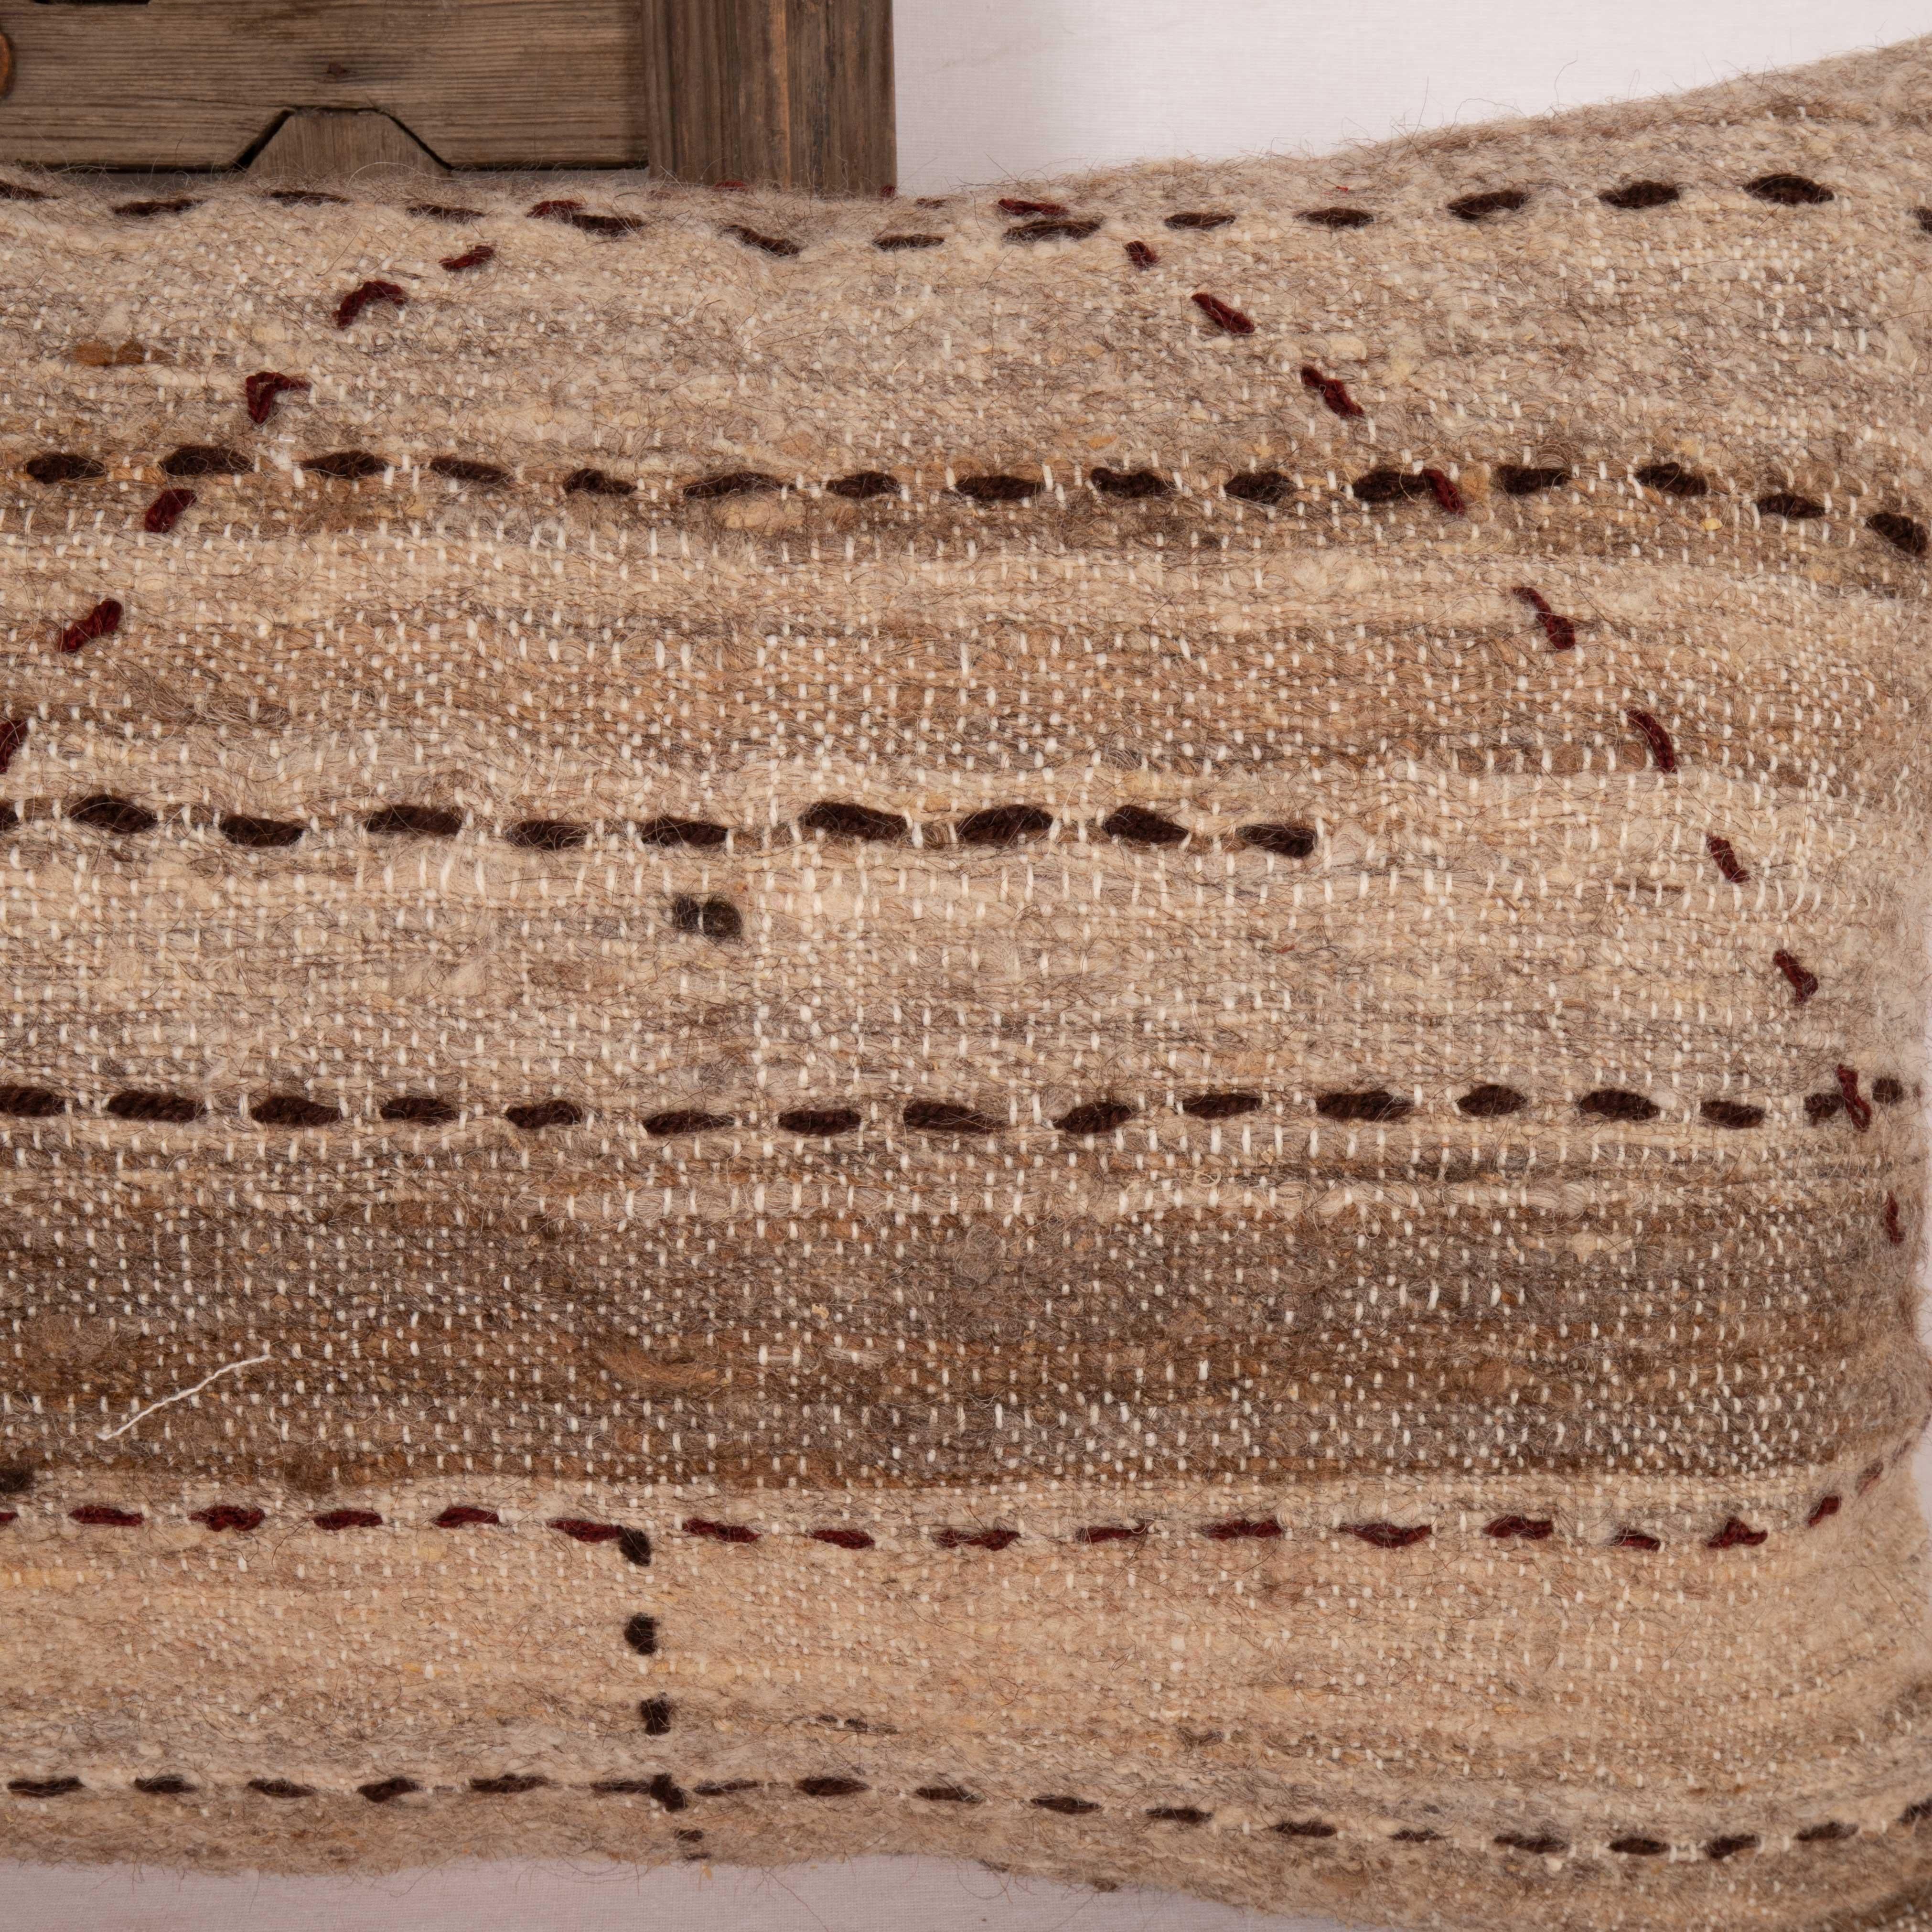 Hand-Woven Neutral Pillow Case Made from a Vintage Wool Cover, Mid 20th C For Sale